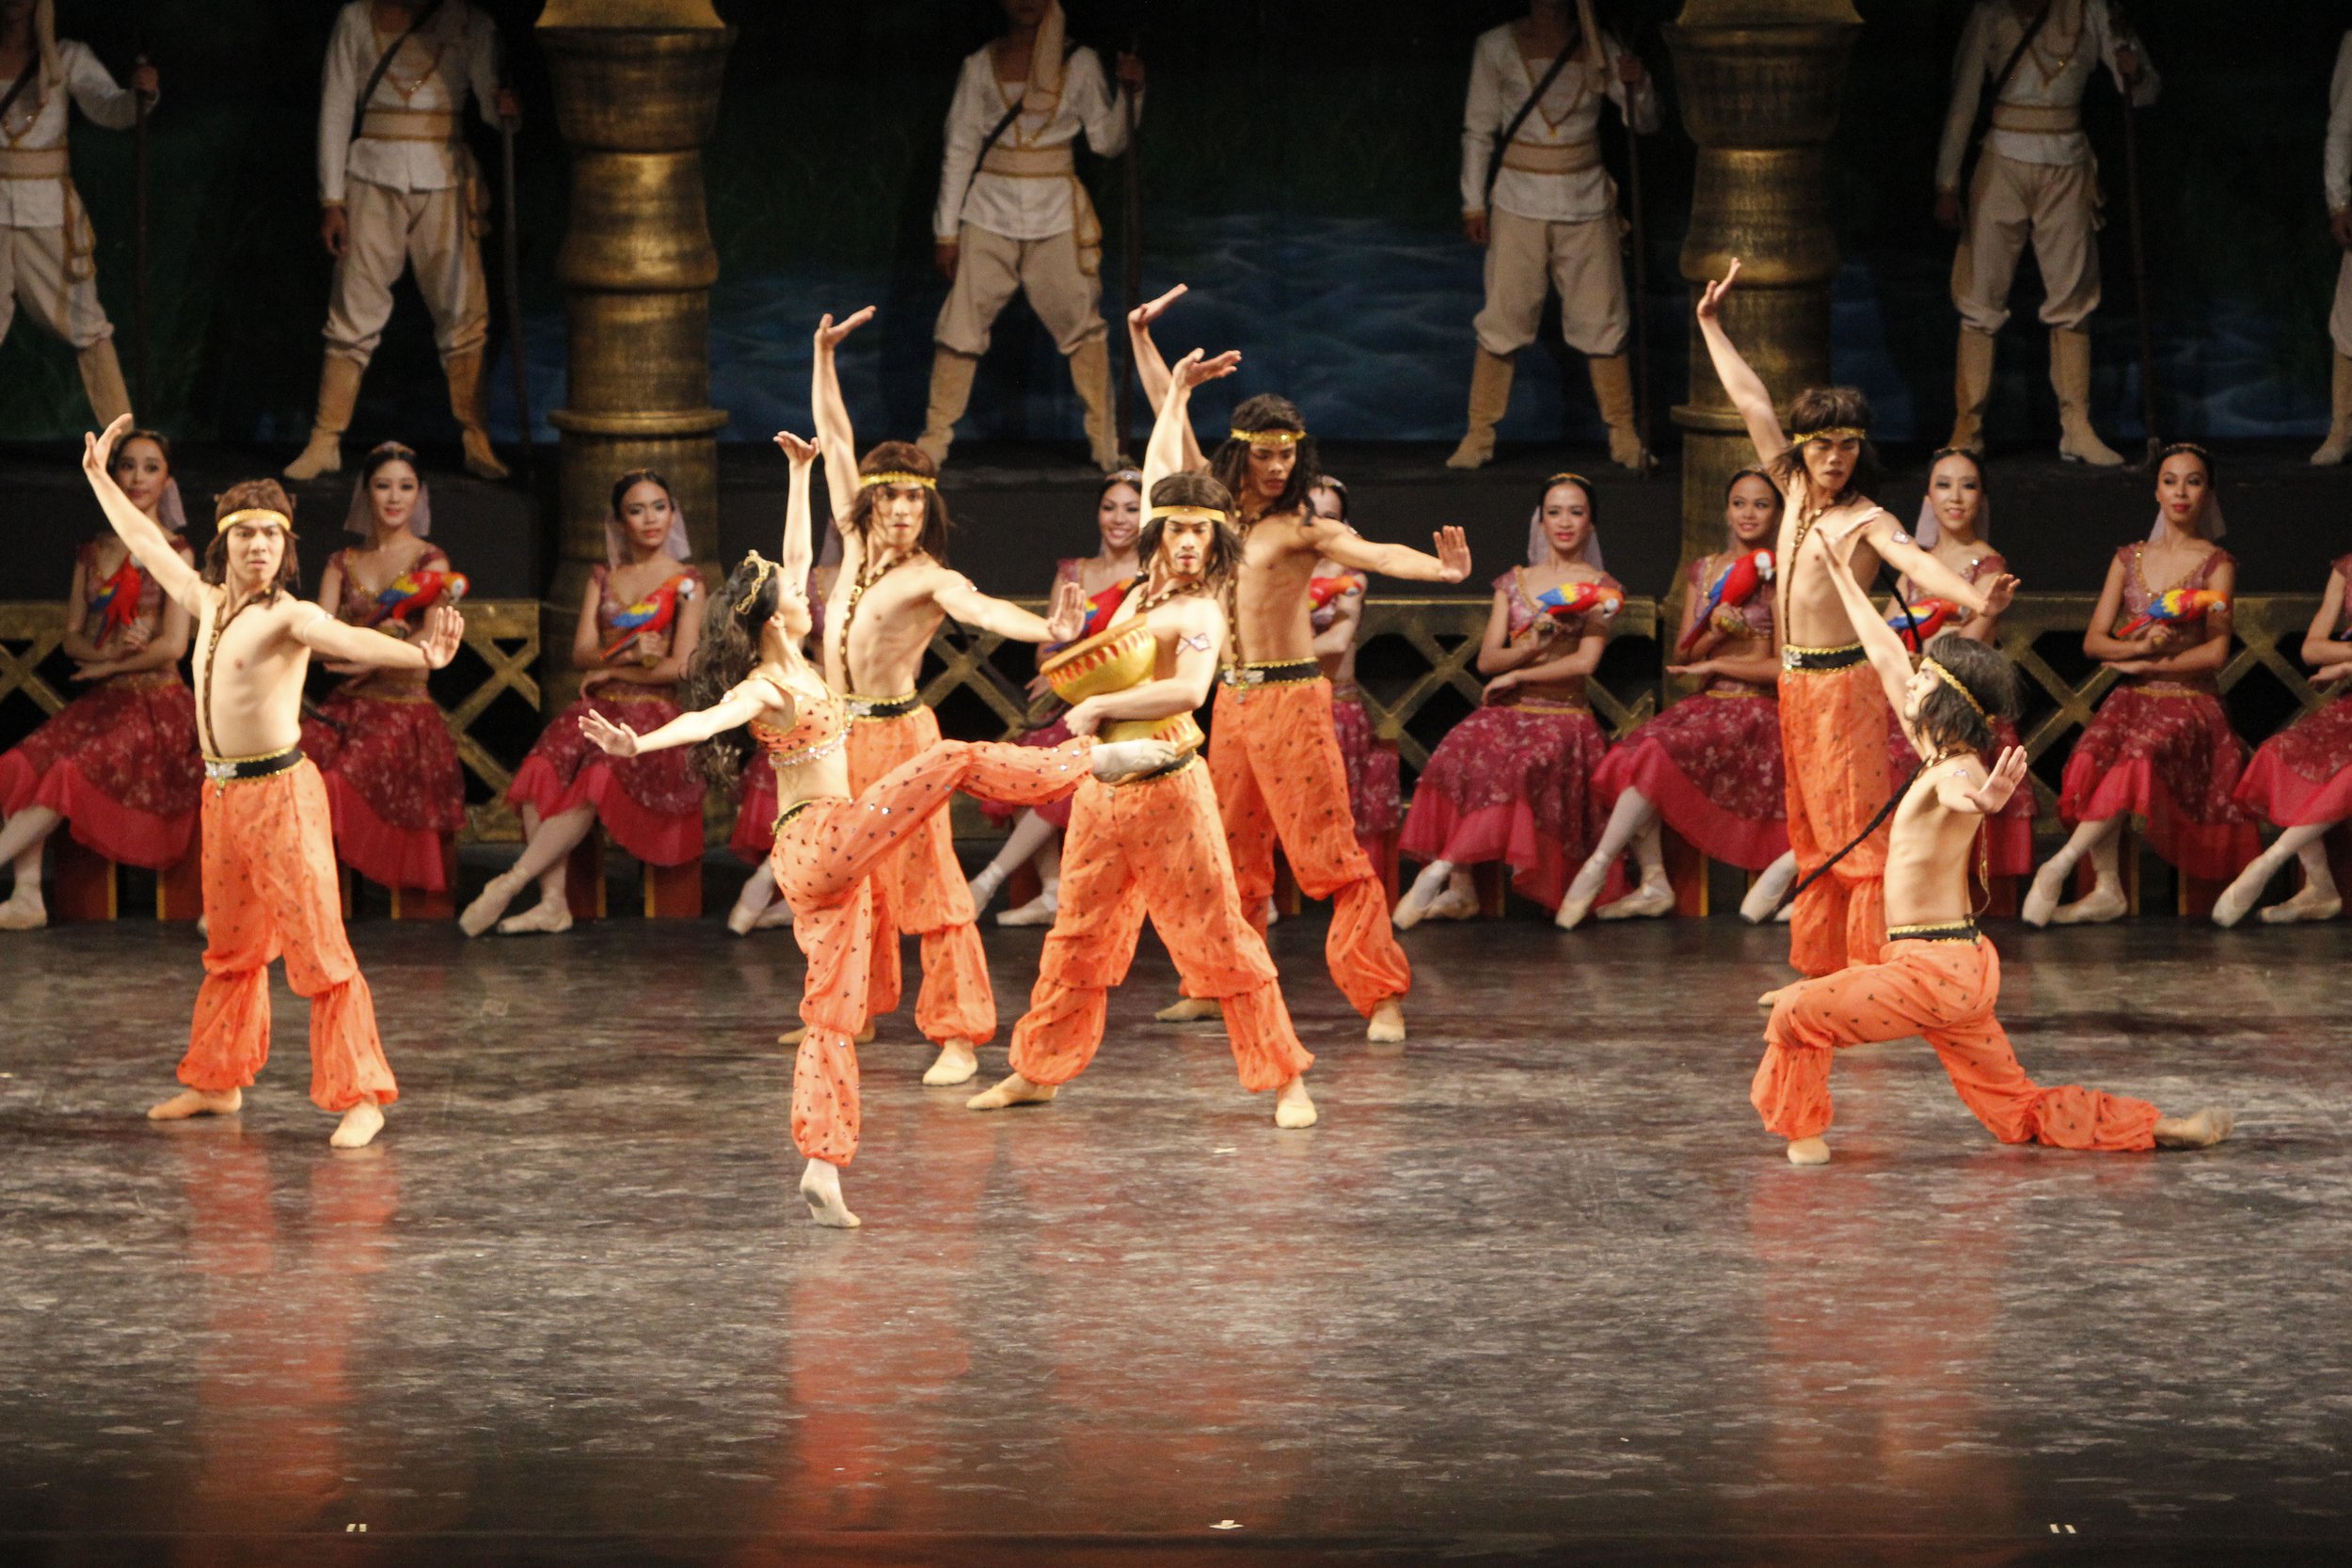    At Gamzatti and Solor’s betrothal in  La Bayadere  (2013), many ceremonial numbers are presented to entertain guests. Here, the performers clad in orange costumes rouse the crowd with their drum-thumping Indian Dance. Photo by Ocs Alvarez   